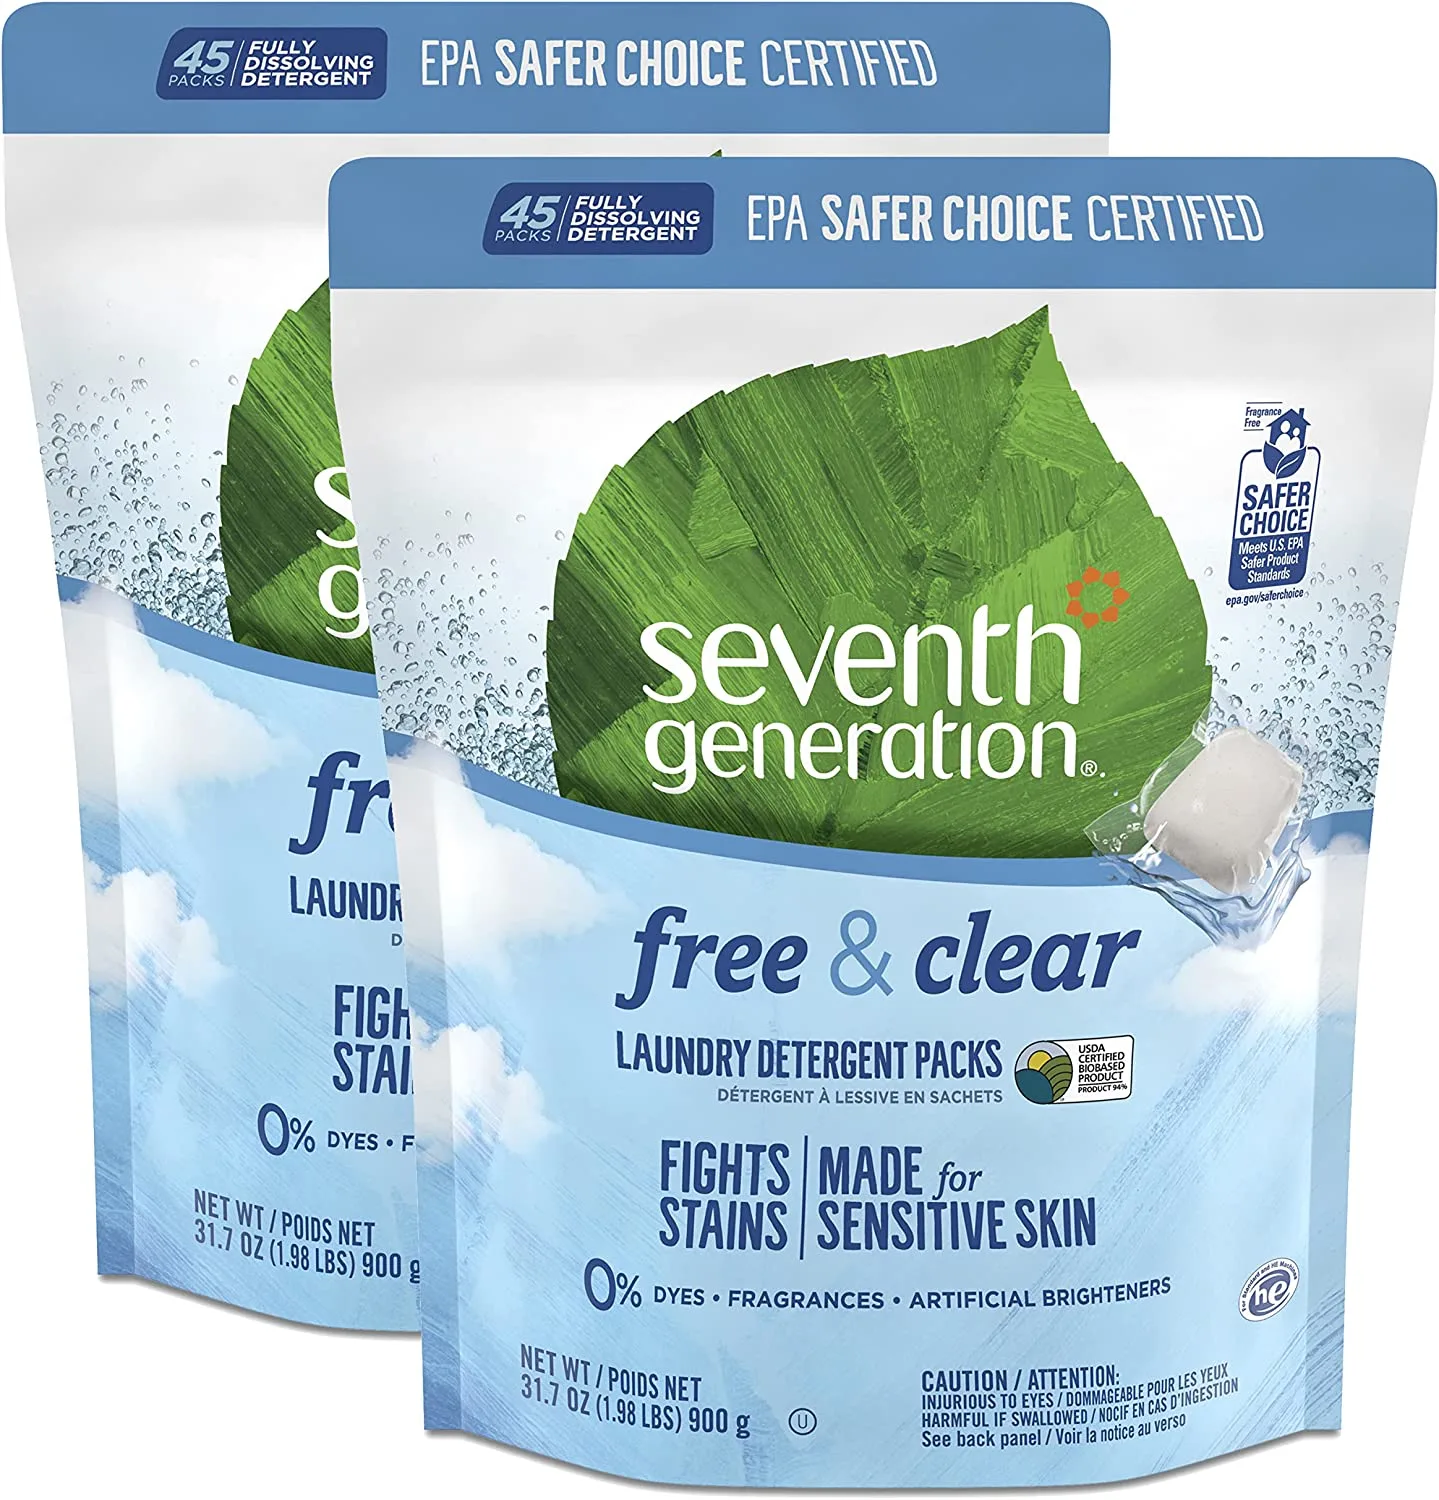 seventh generation laundry pod are easy to travel with and good for the environment.